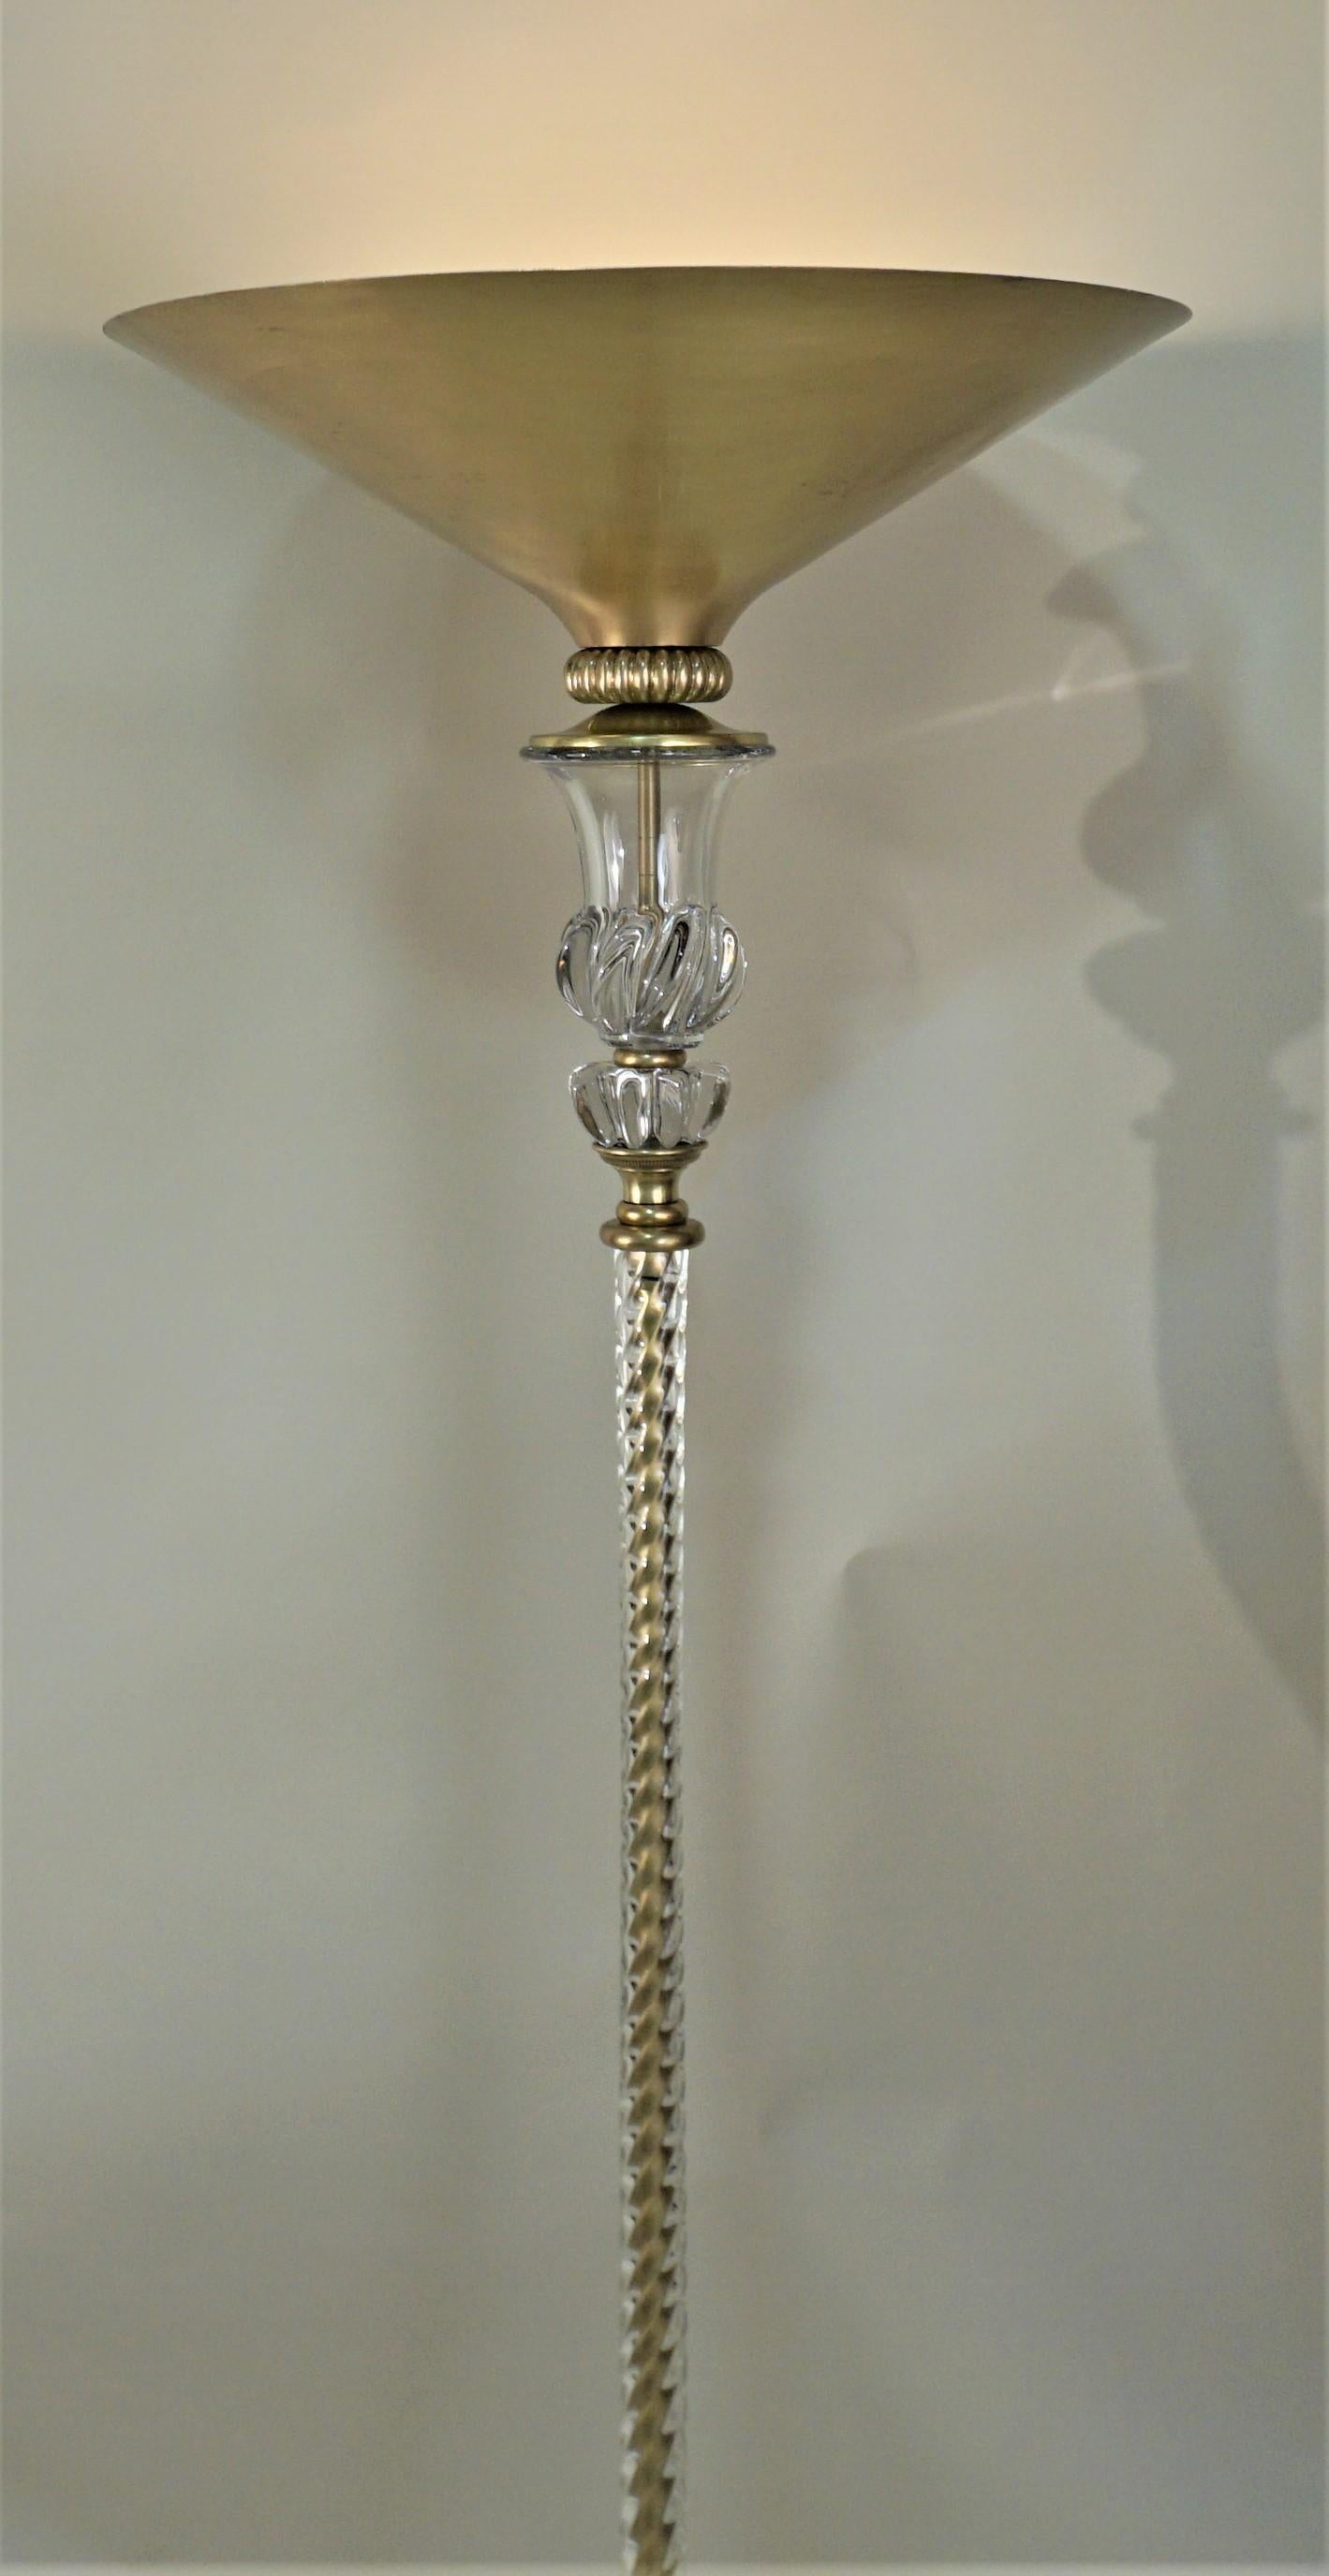 Early 20th Century Baccarat Crystal Style Art Deco Torchiere Floor Lamp